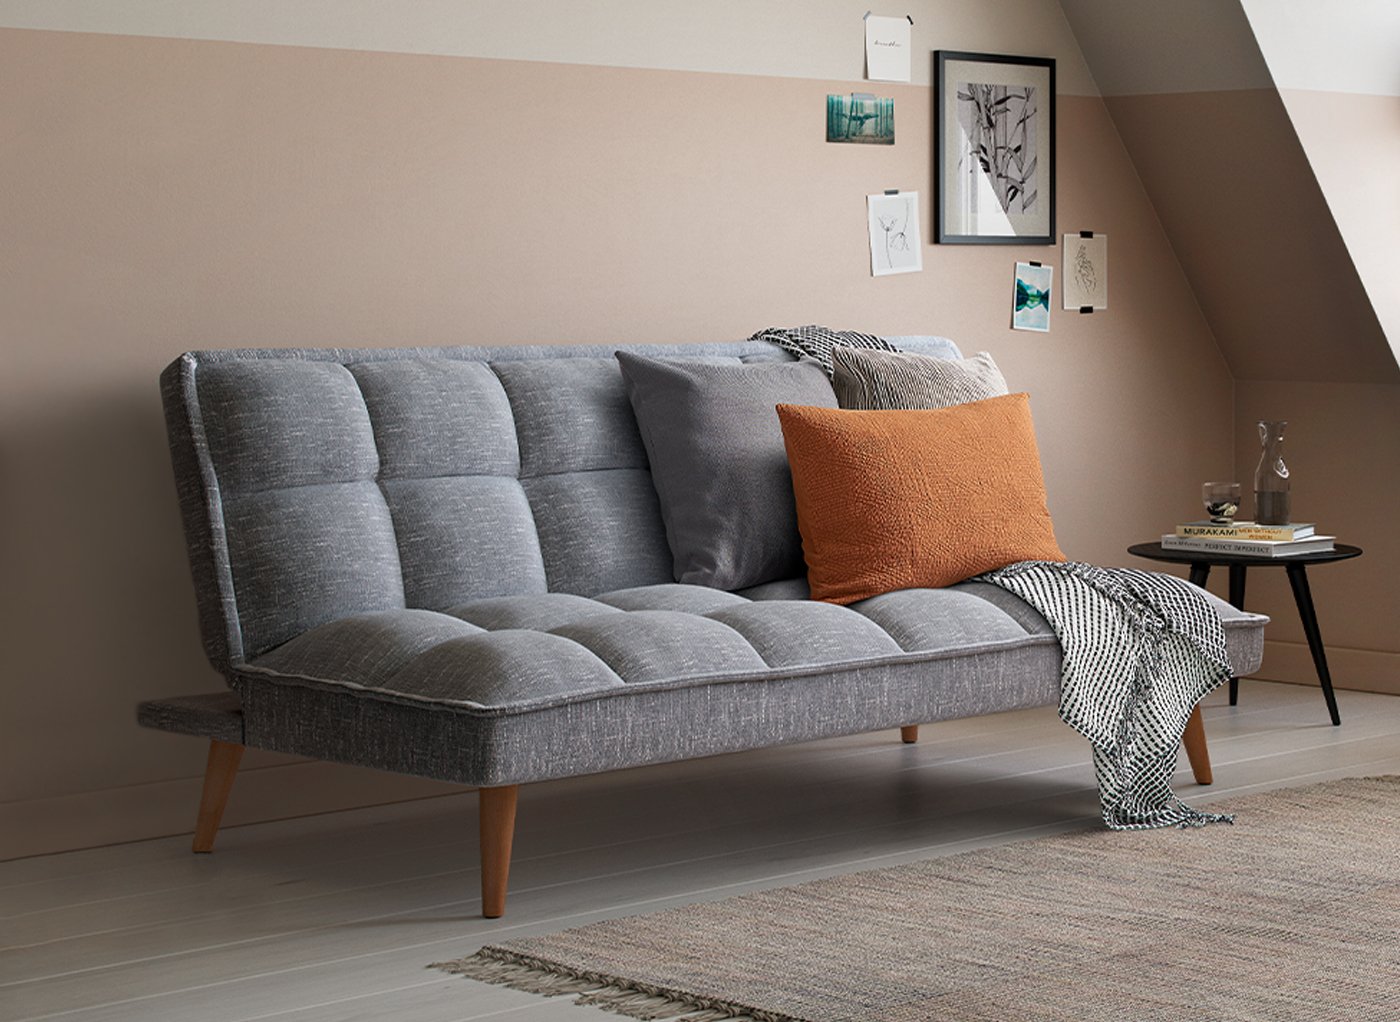 How to choose the perfect sofa bed